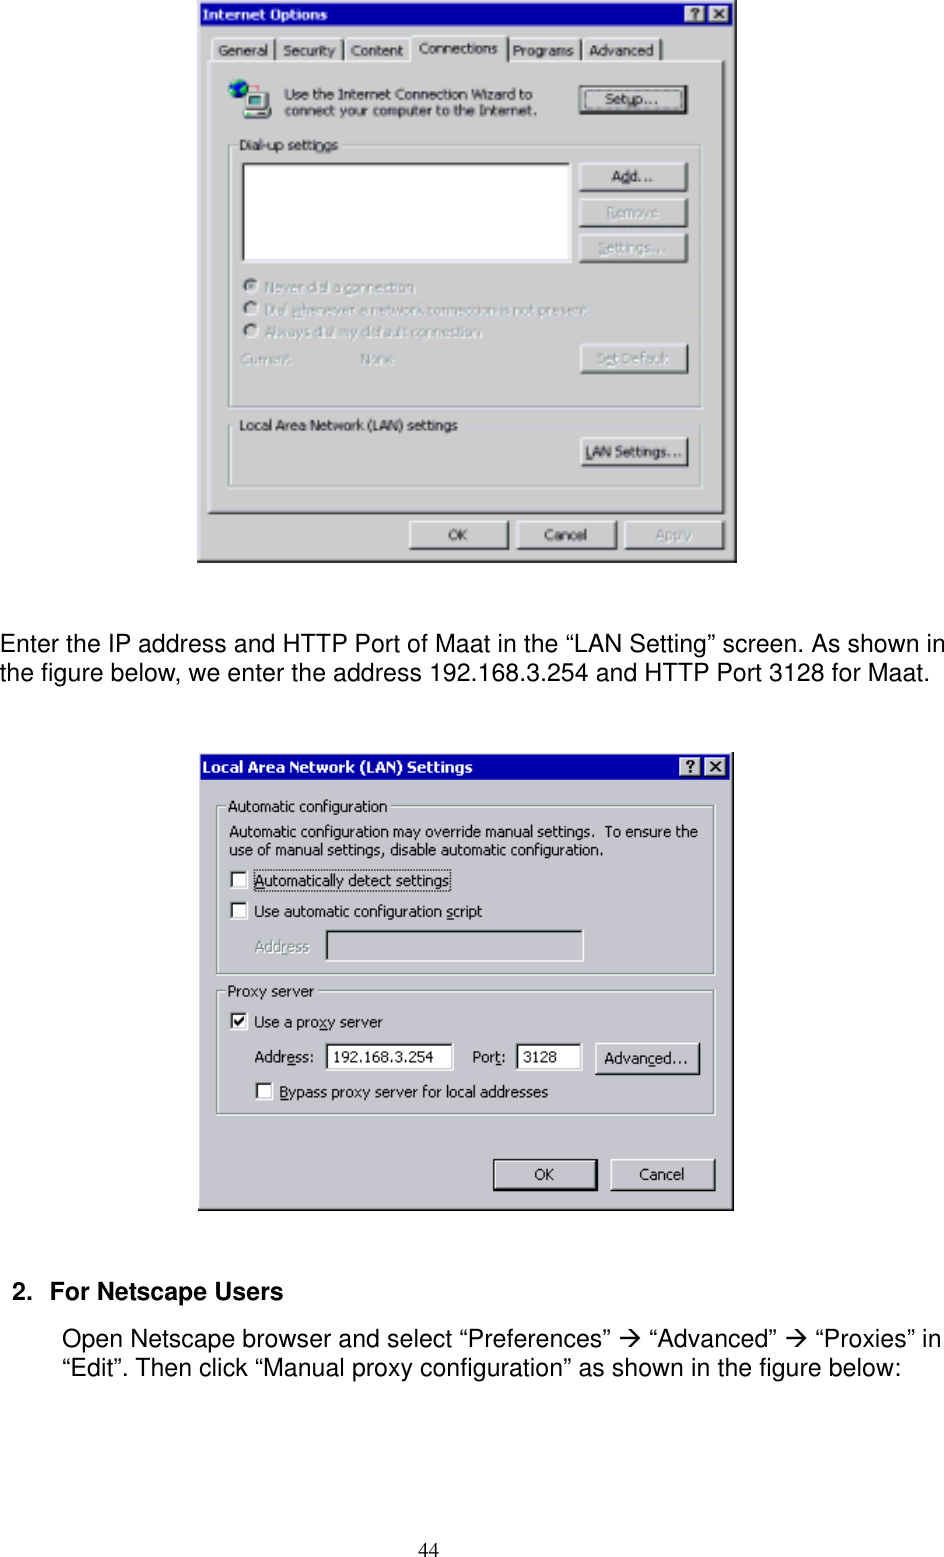  44  Enter the IP address and HTTP Port of Maat in the “LAN Setting” screen. As shown in the figure below, we enter the address 192.168.3.254 and HTTP Port 3128 for Maat.    2.  For Netscape Users Open Netscape browser and select “Preferences”  “Advanced”  “Proxies” in “Edit”. Then click “Manual proxy configuration” as shown in the figure below: 